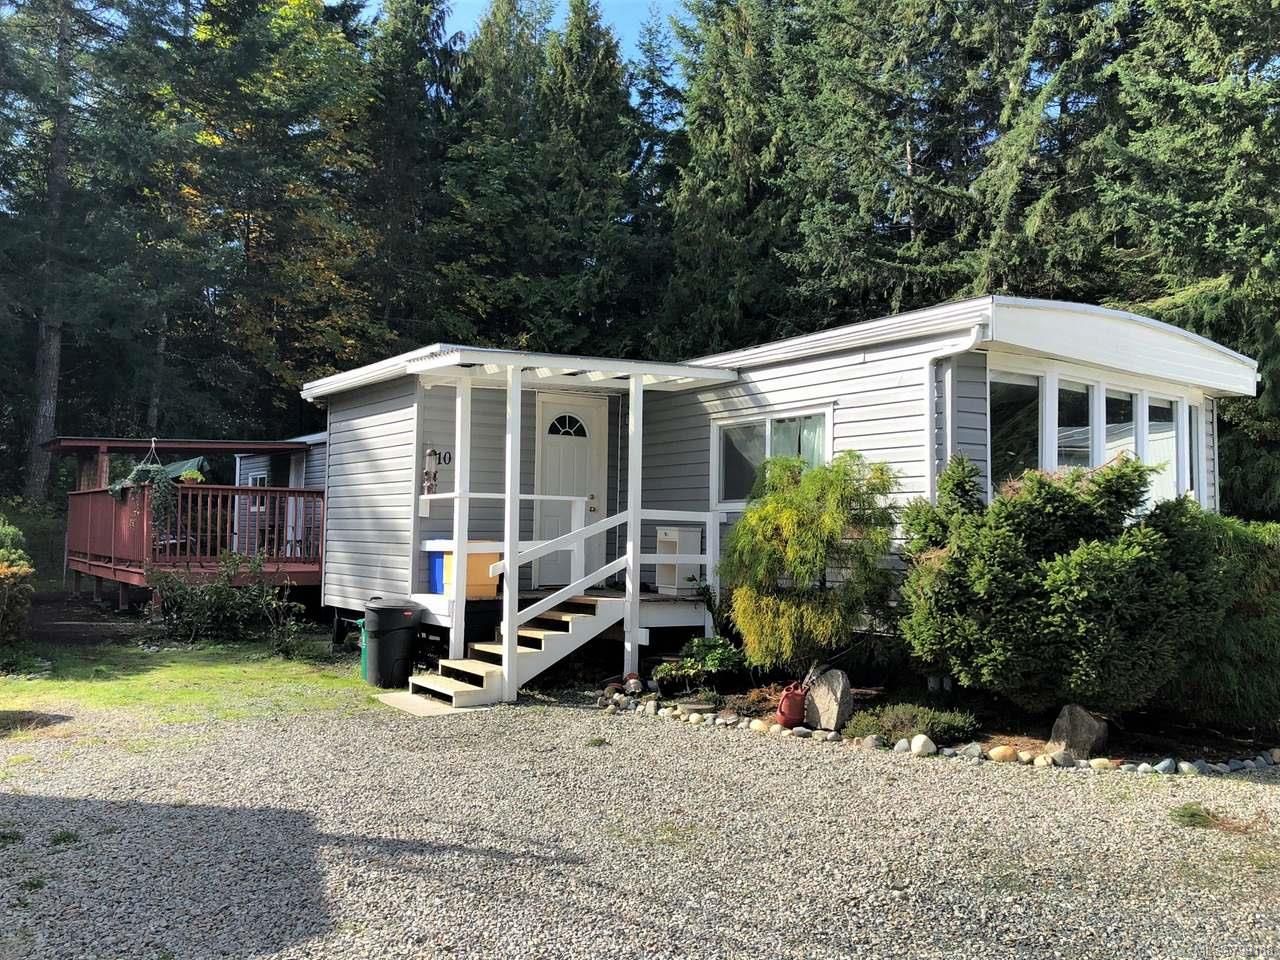 Photo 1: Photos: 10 3704 MELROSE ROAD in QUALICUM BEACH: PQ Errington/Coombs/Hilliers Manufactured Home for sale (Parksville/Qualicum)  : MLS®# 799188